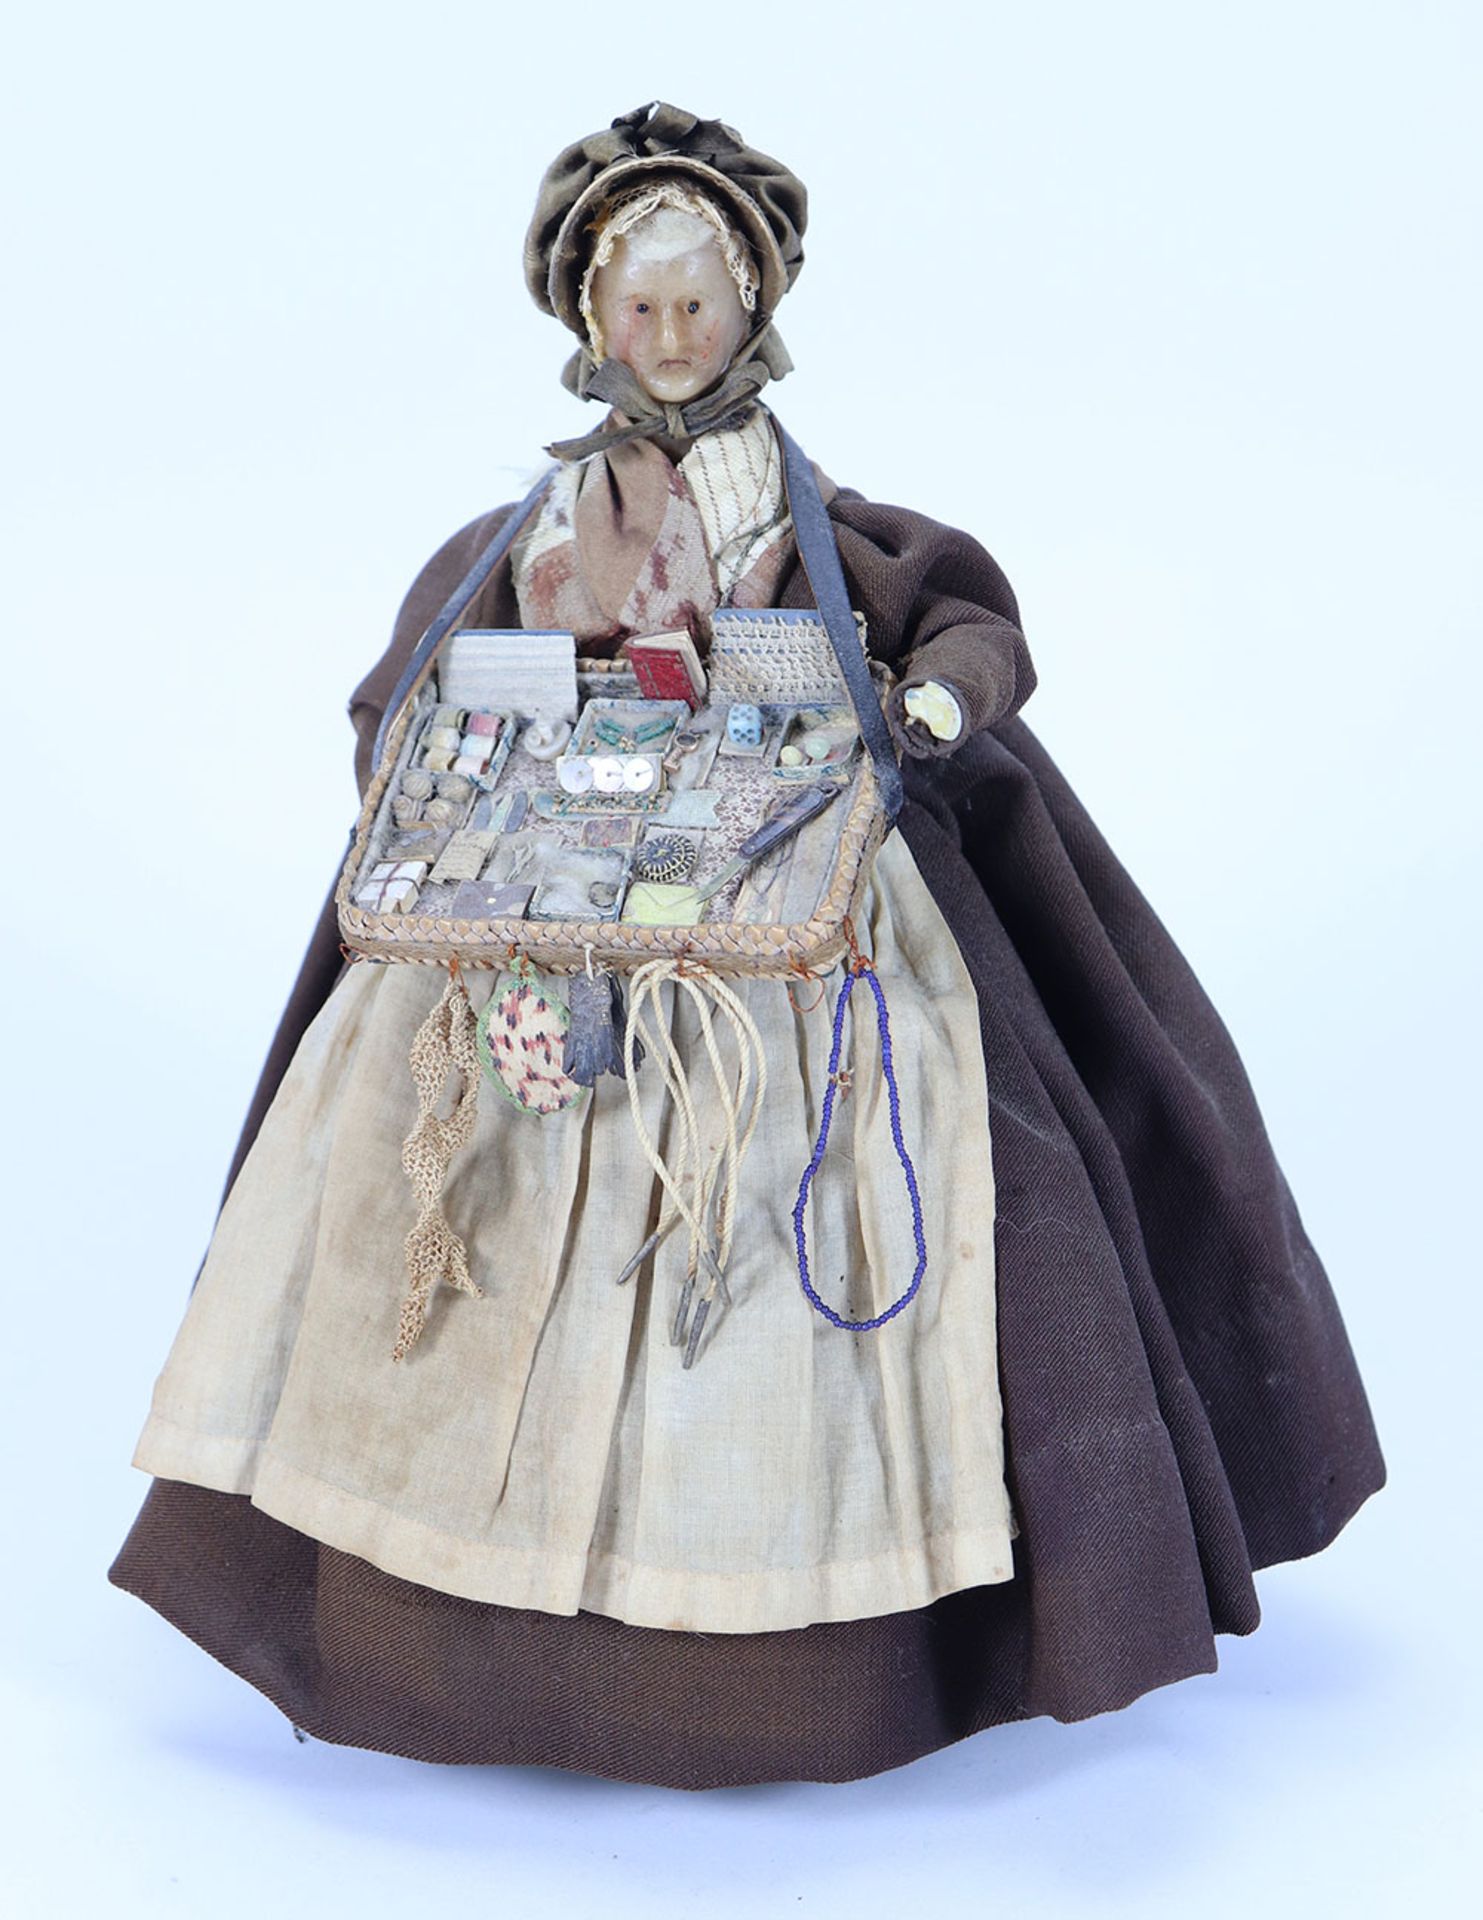 All original early bees wax pedlar doll on wooden jointed body, German 1830s,